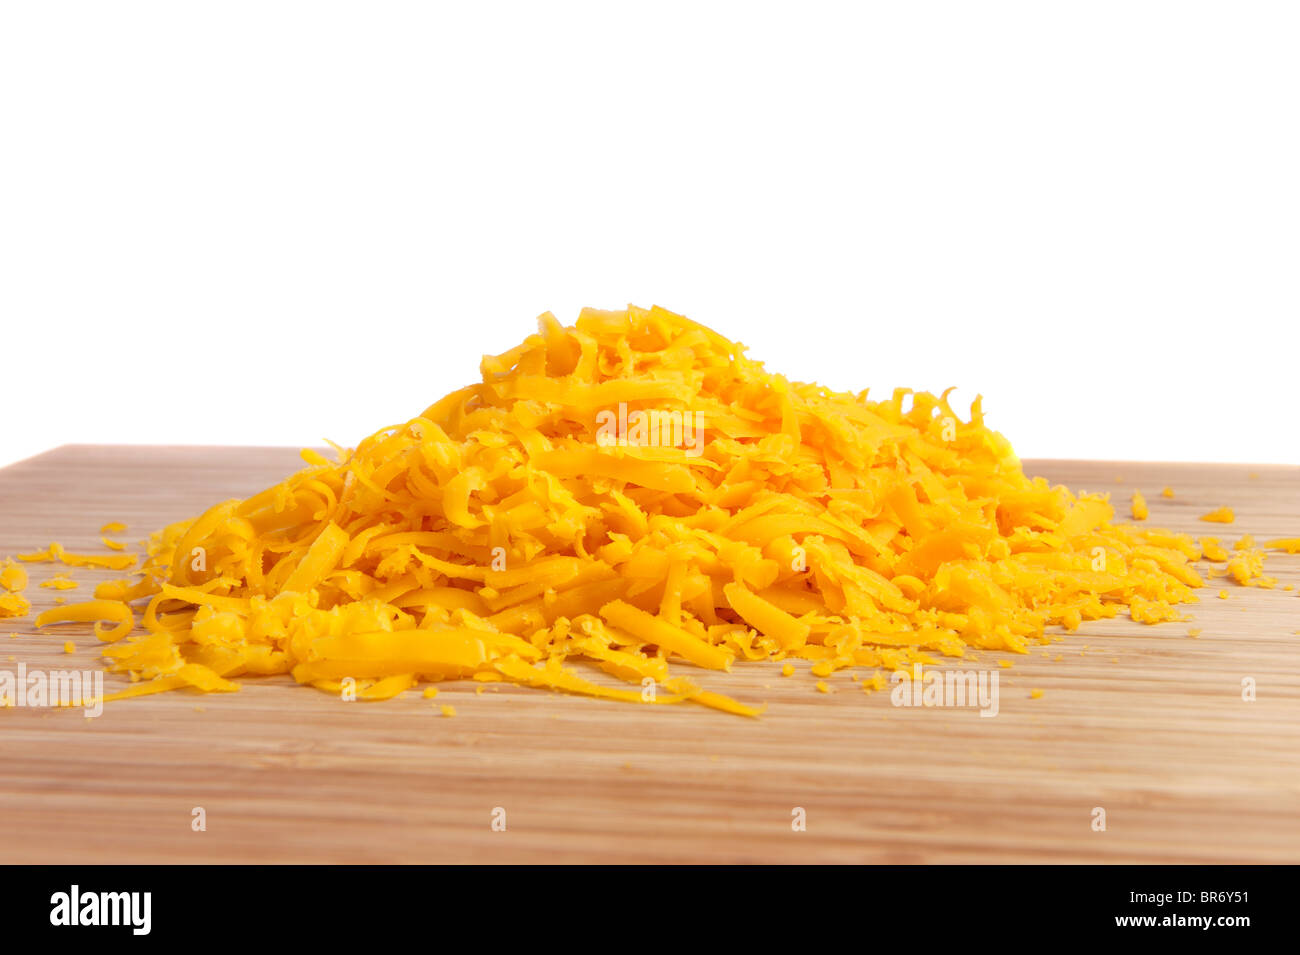 Freshly grated cheese on a cutting board with a white background for use as a design element or copy. Stock Photo